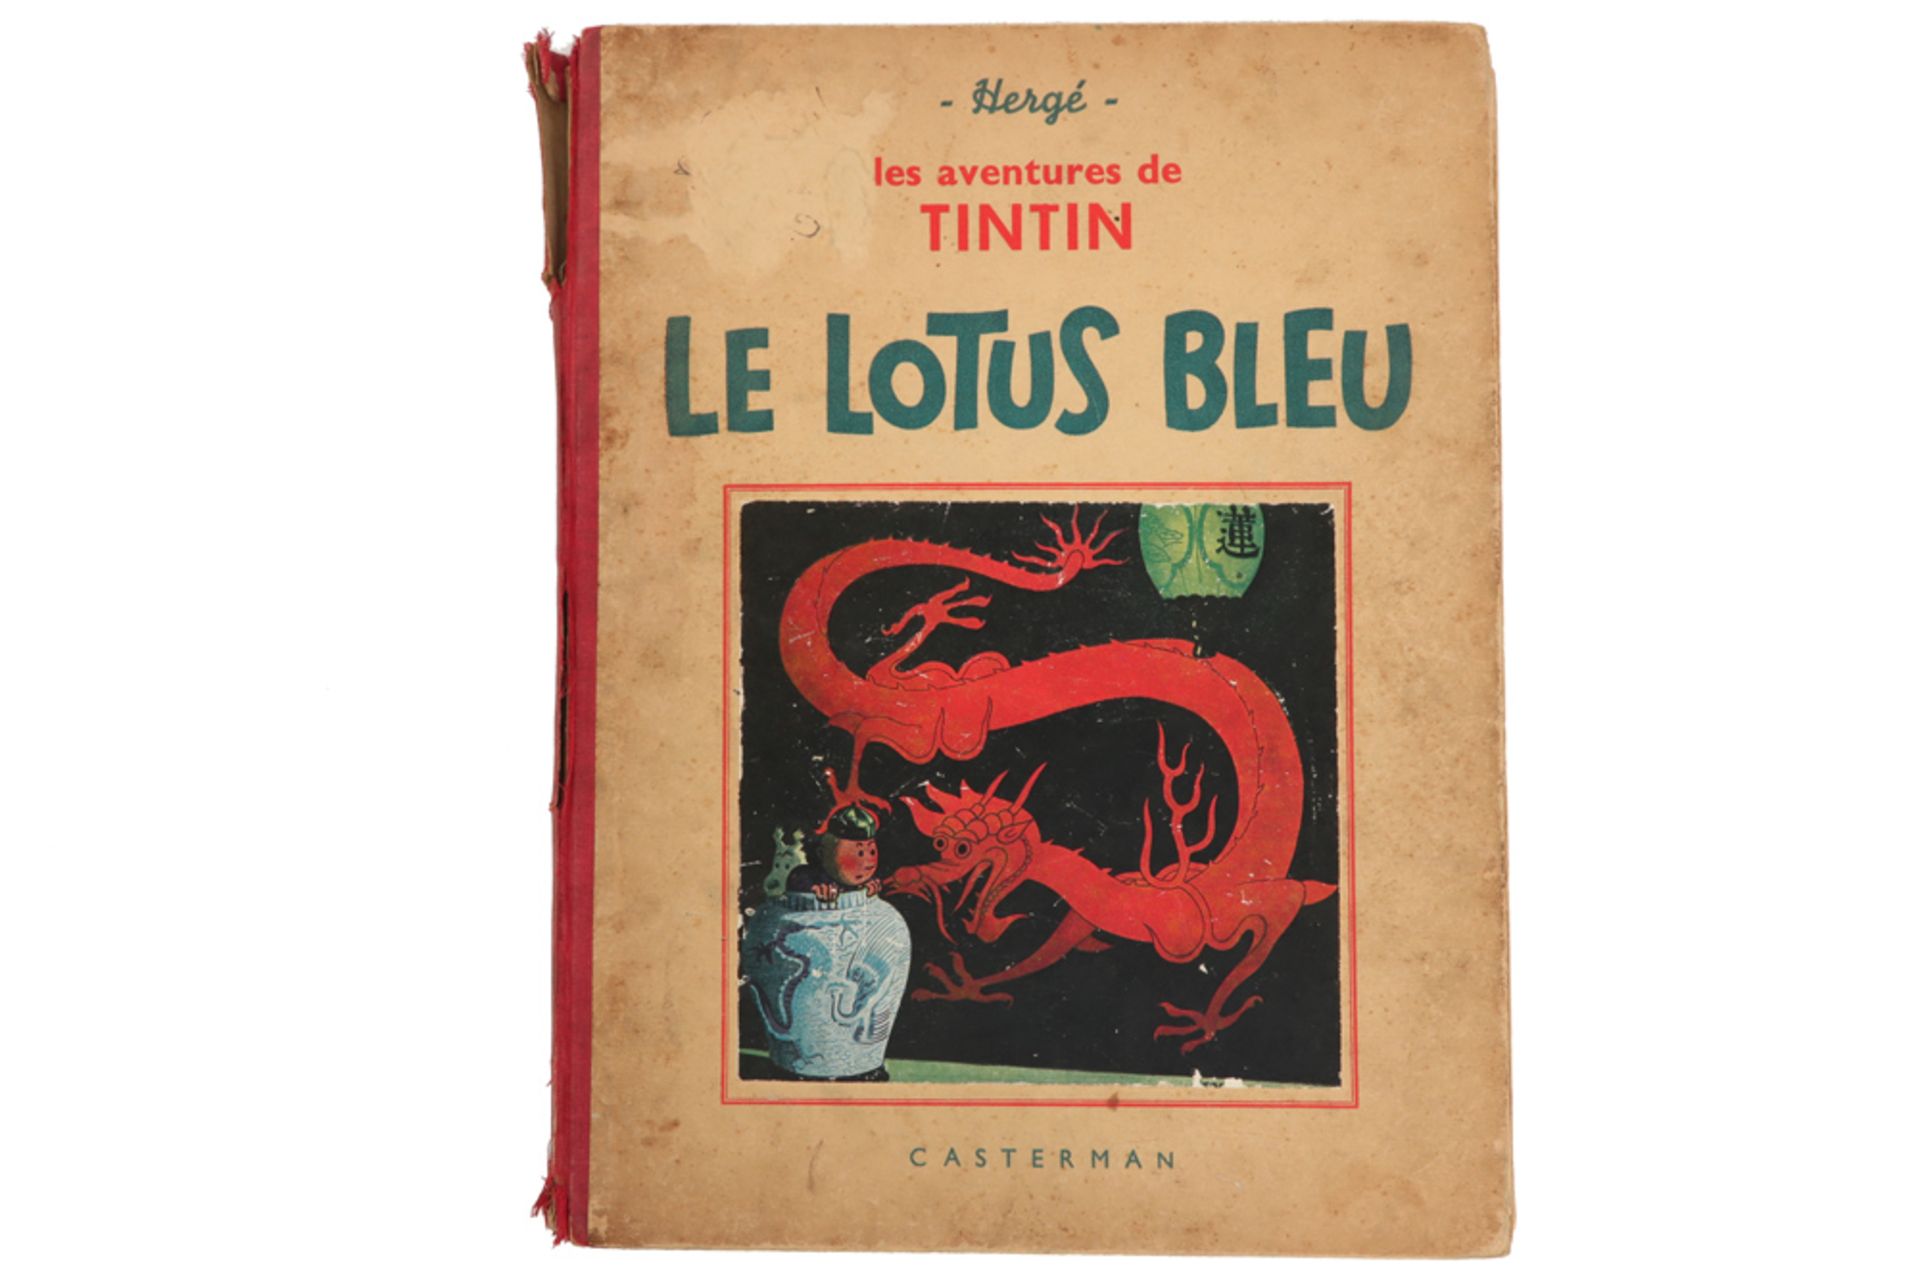 Hergé hand signed and dedicated "Tintin" - album : "Le Lotus bleu" with dedication "A Kristin, Annie